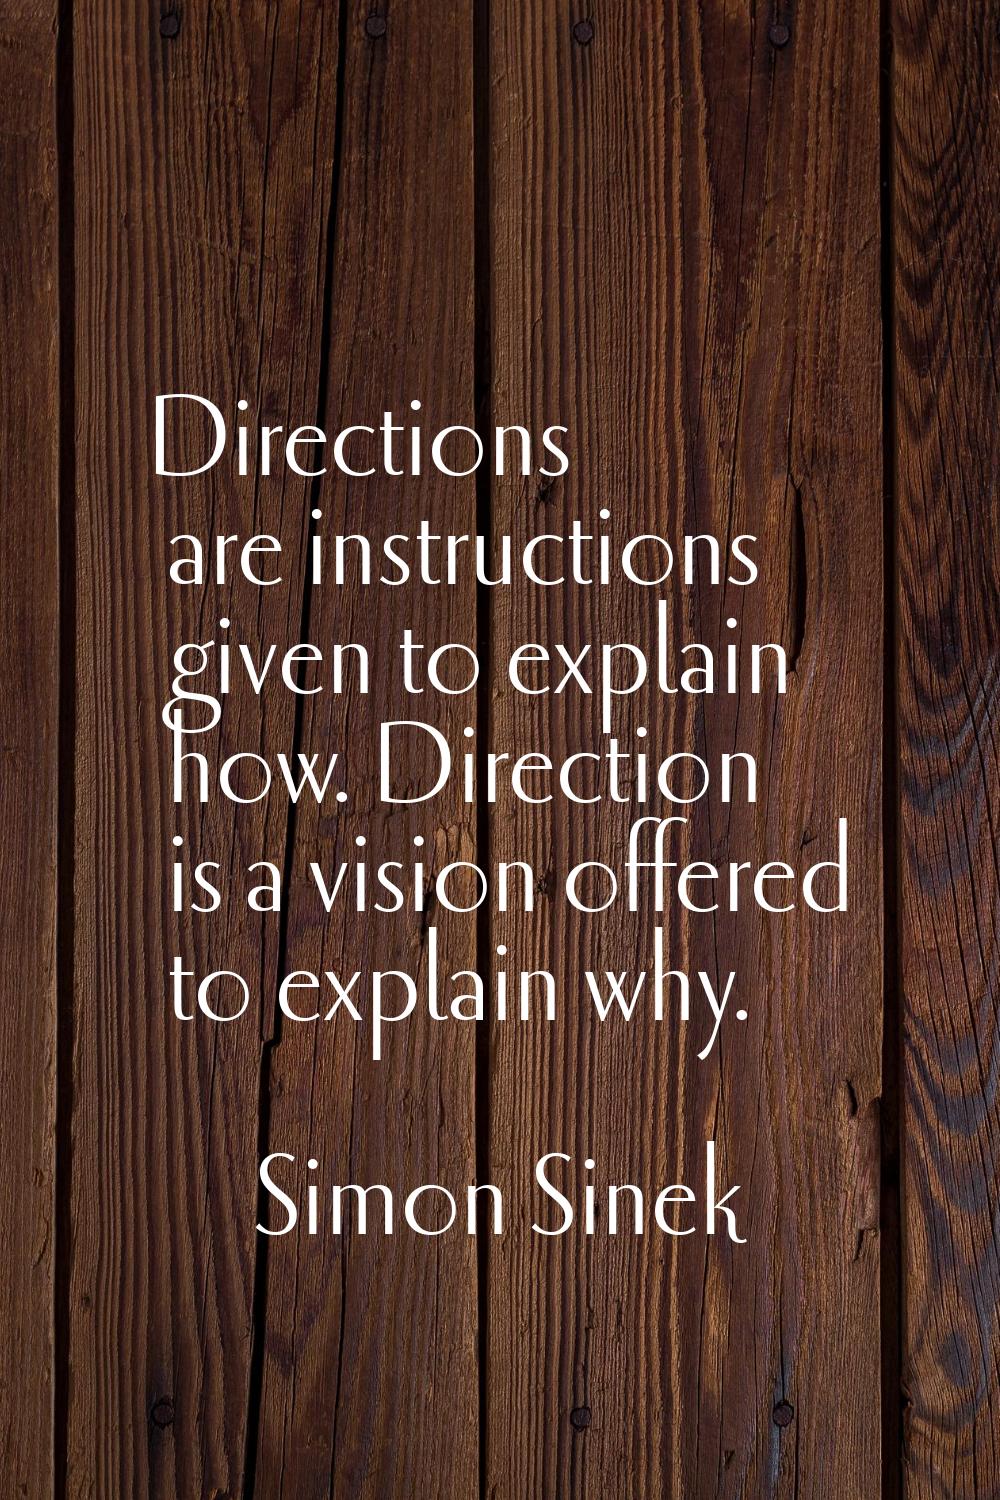 Directions are instructions given to explain how. Direction is a vision offered to explain why.